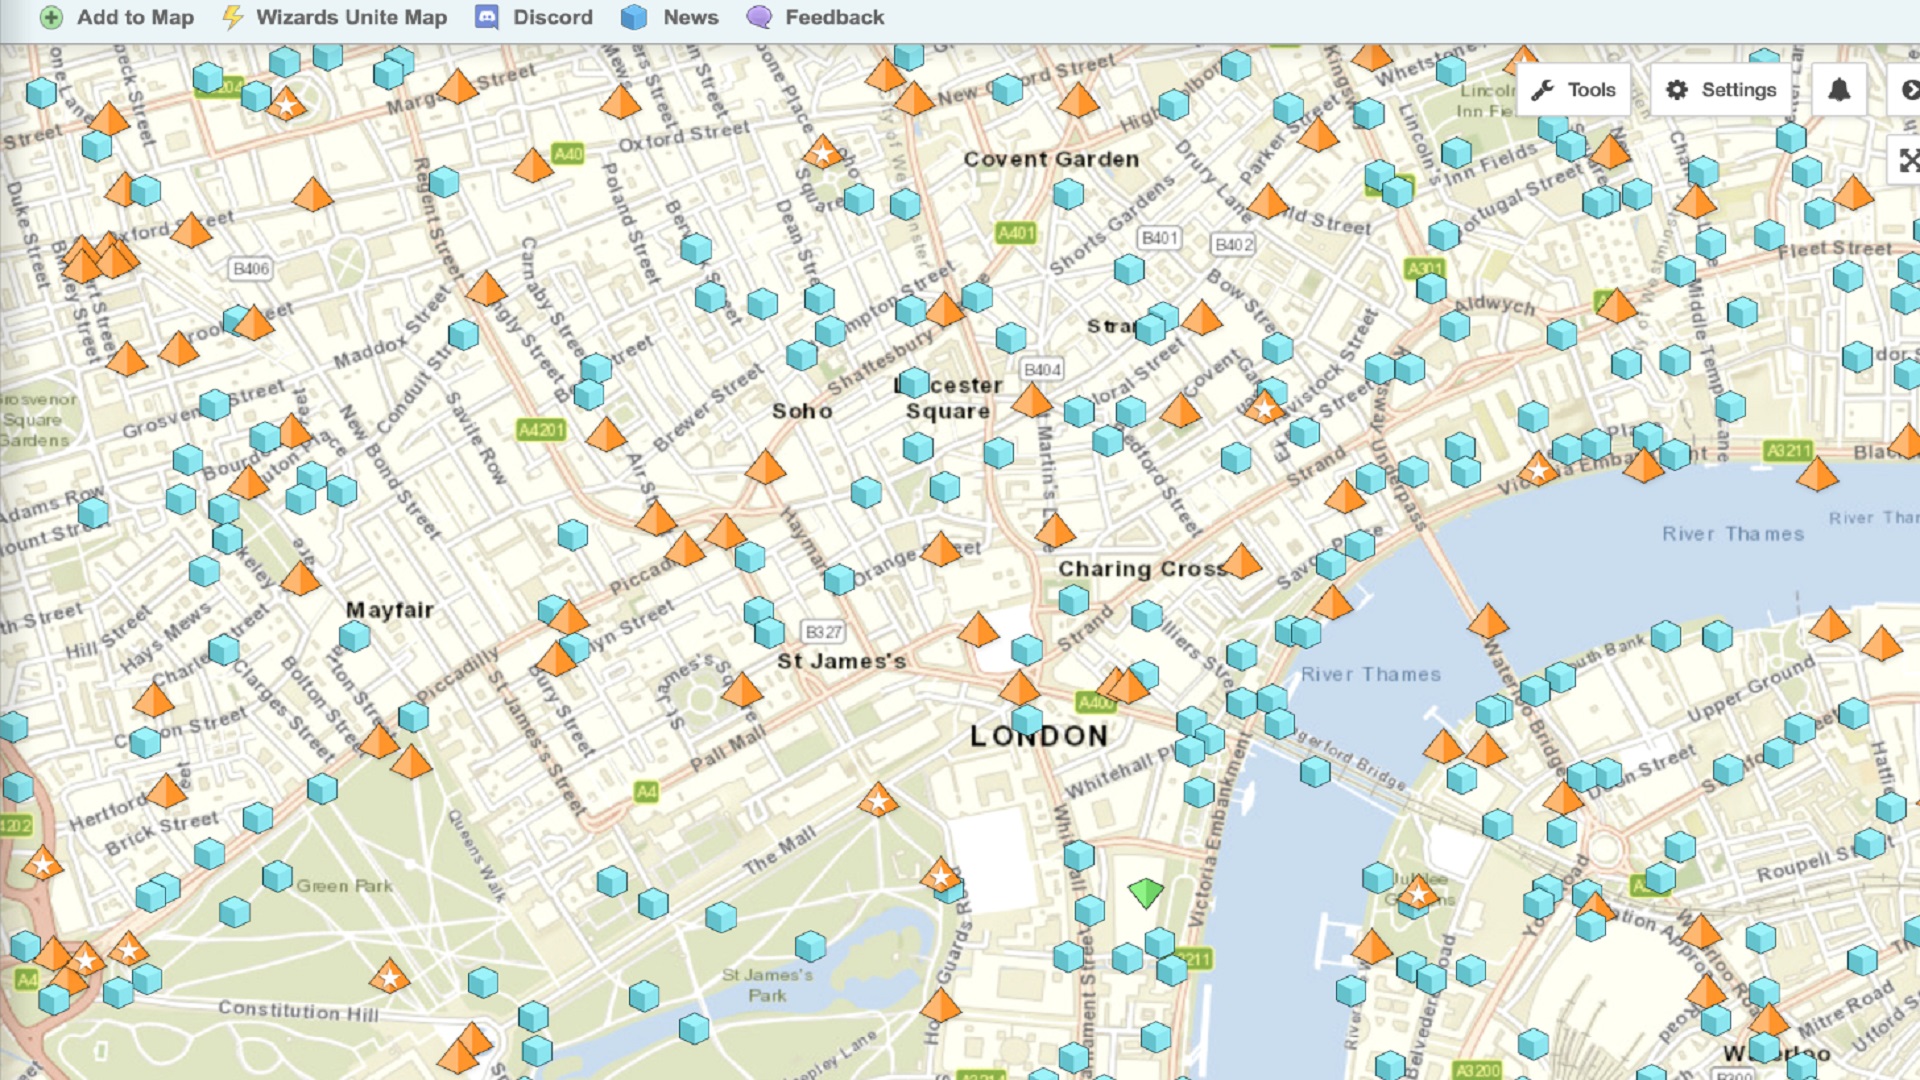 Pokémon Go maps - a street map of London showing locations of Pokémon Go stops and gyms